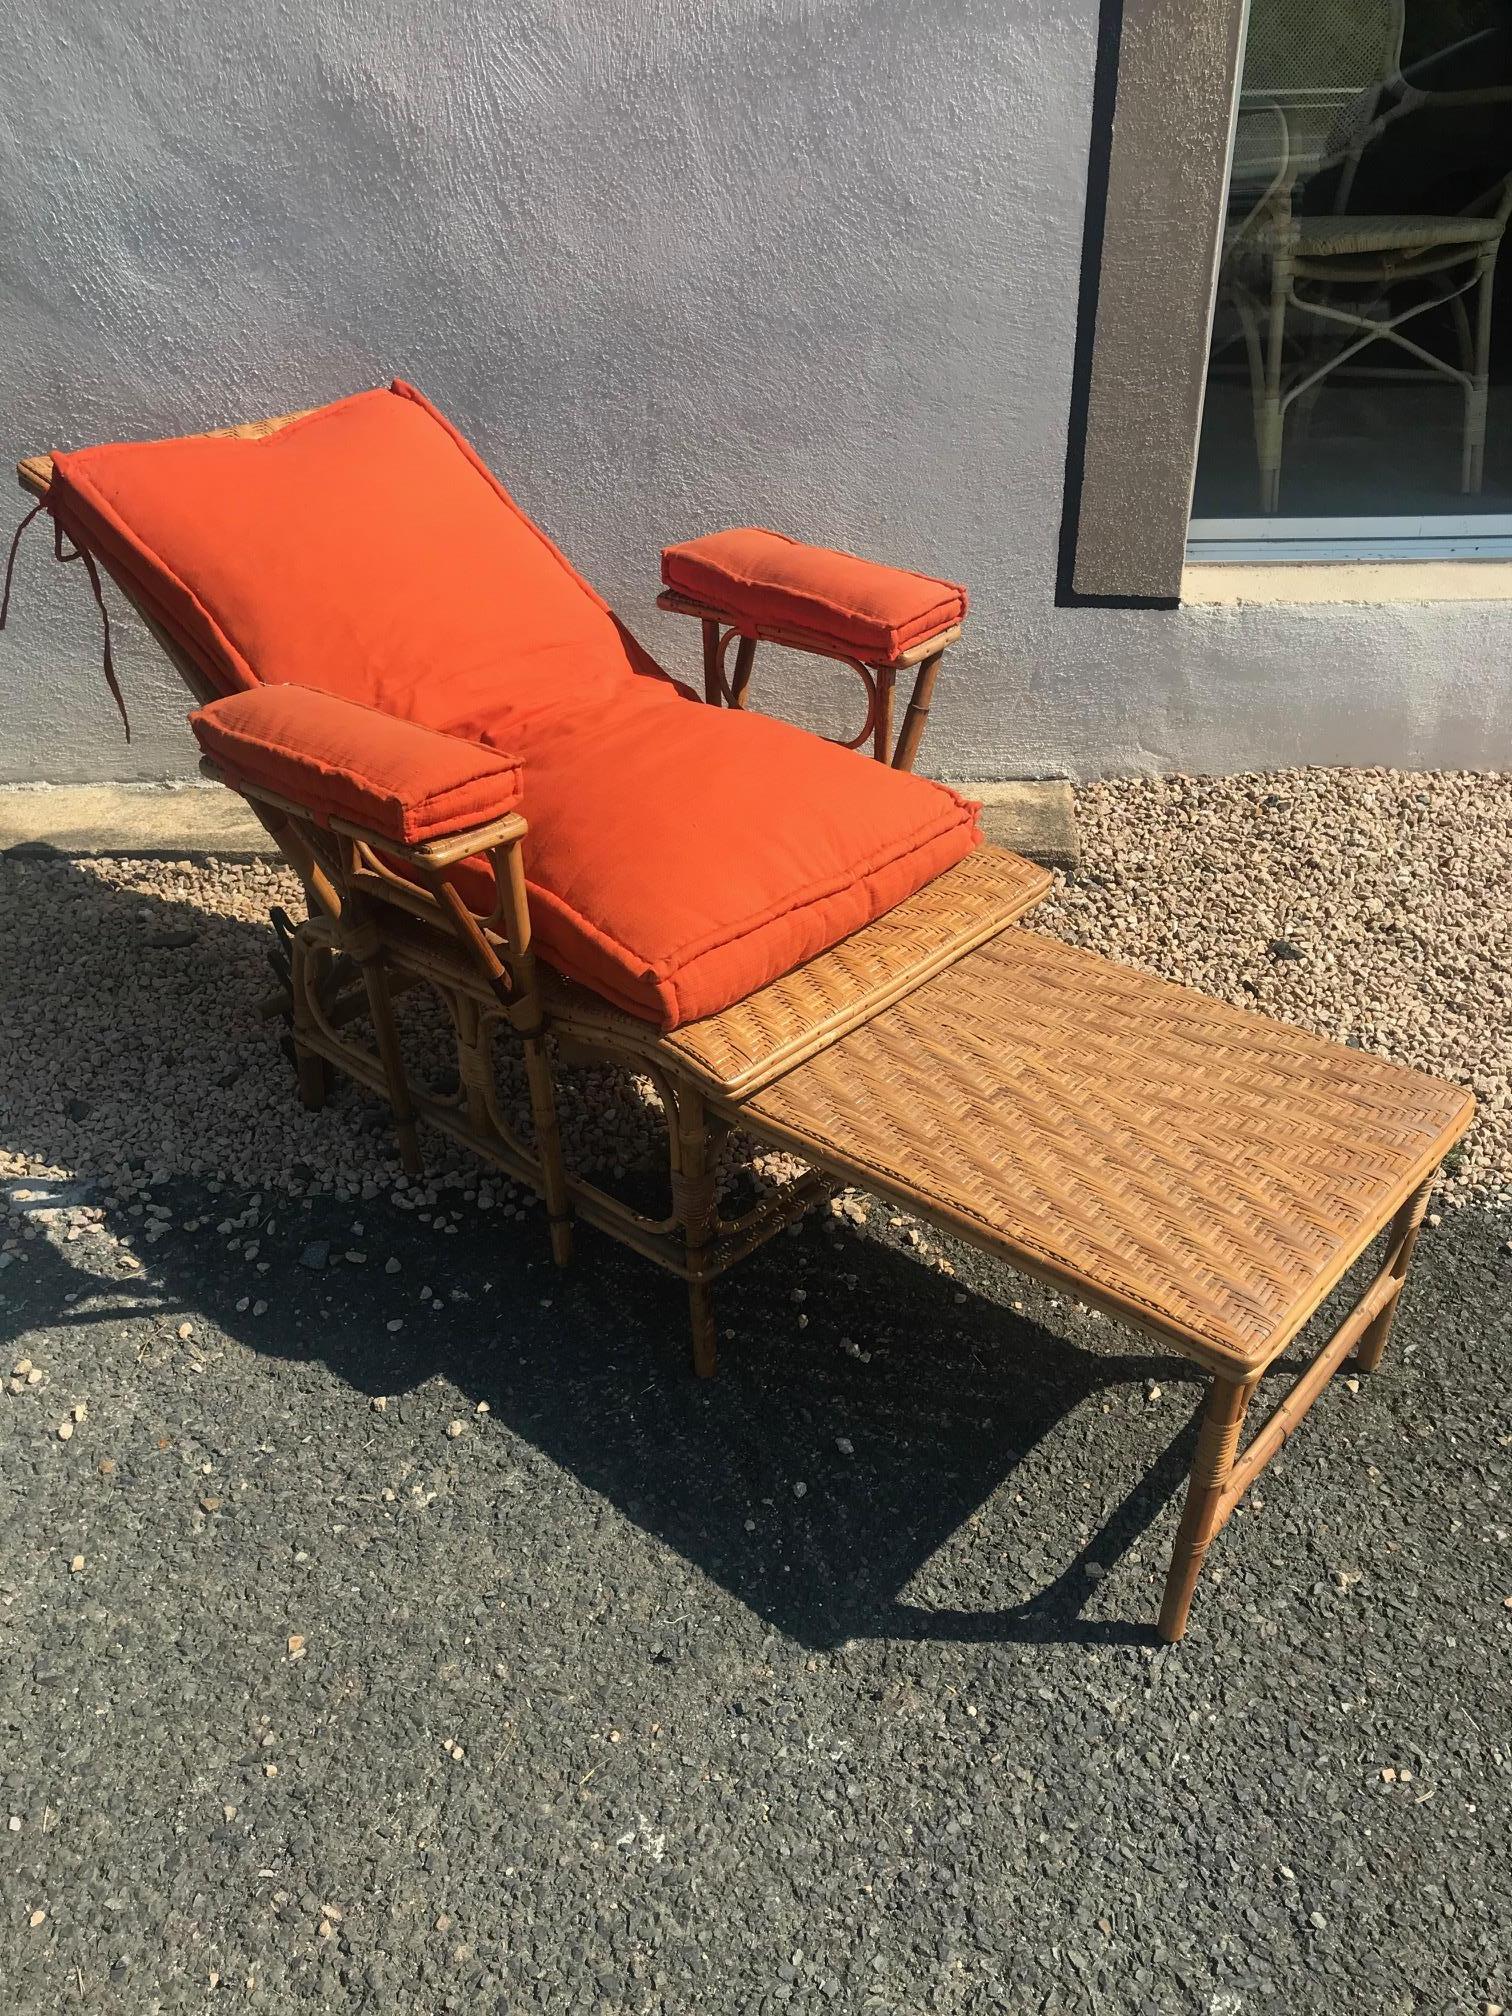 Beautiful early 20th century French wicker chaise longue from the 1900s.
Removable Orange cushion on the seating and the armrests.
The armrests are removable too and hold thanks to four metal circles.
The footstool is removable and can be tidy up